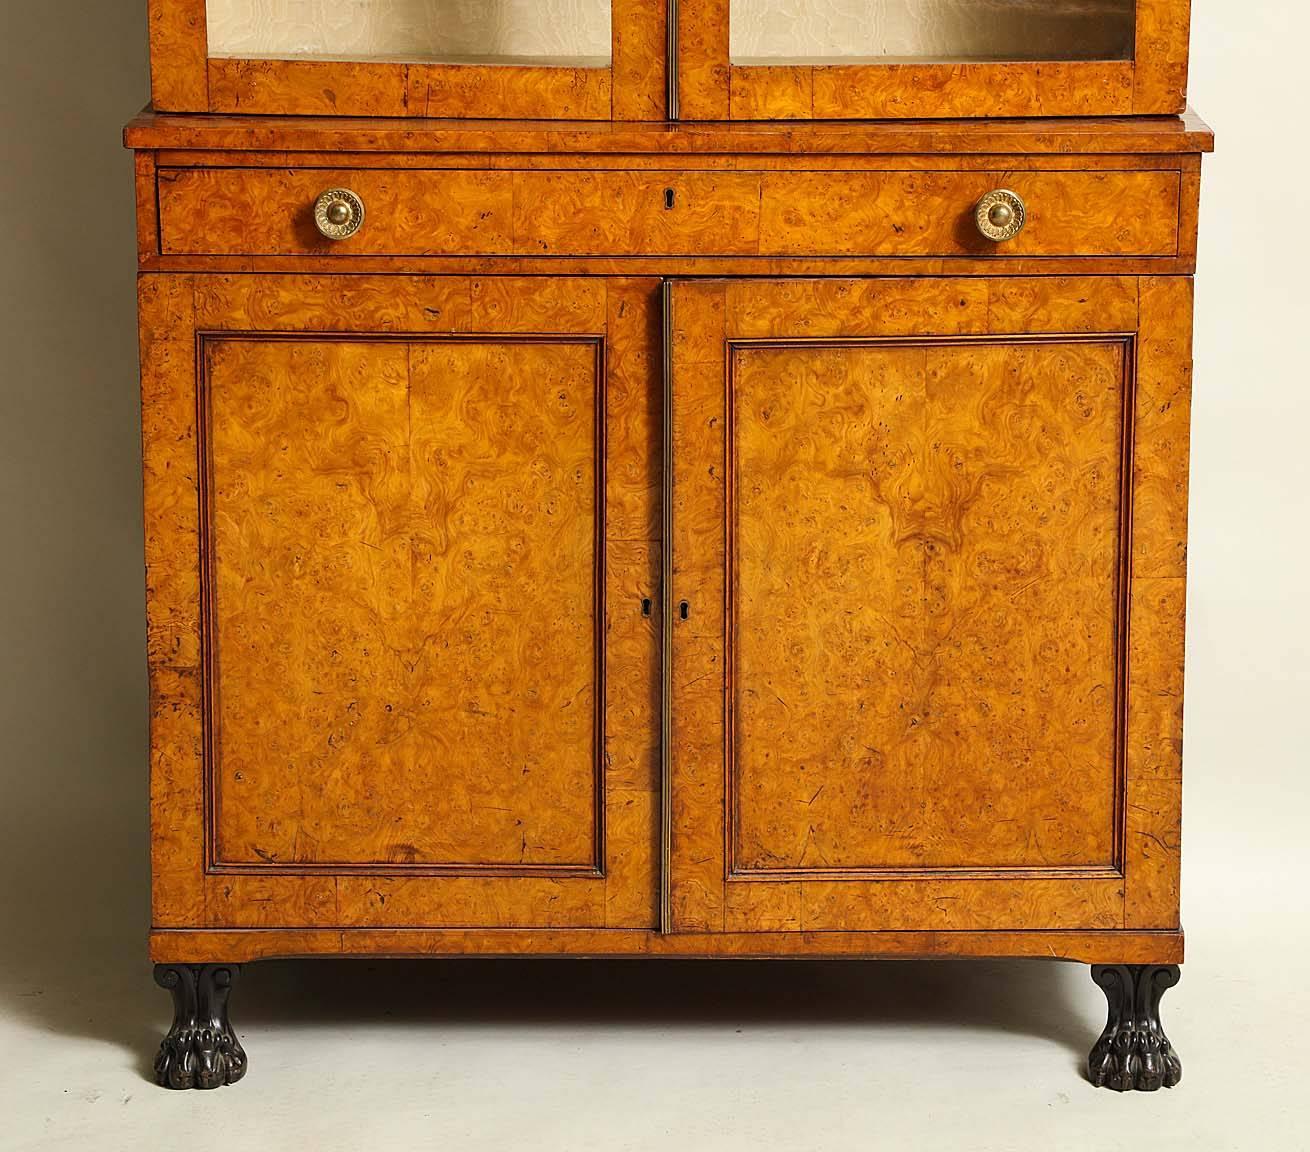 Very fine early 19th century burr oak cabinet, the pediment with three bronze stars over two glazed doors, the lower cabinet with single fitted drawer over two cupboard doors concealing four graduated drawers, standing on ebonized paw feet, the